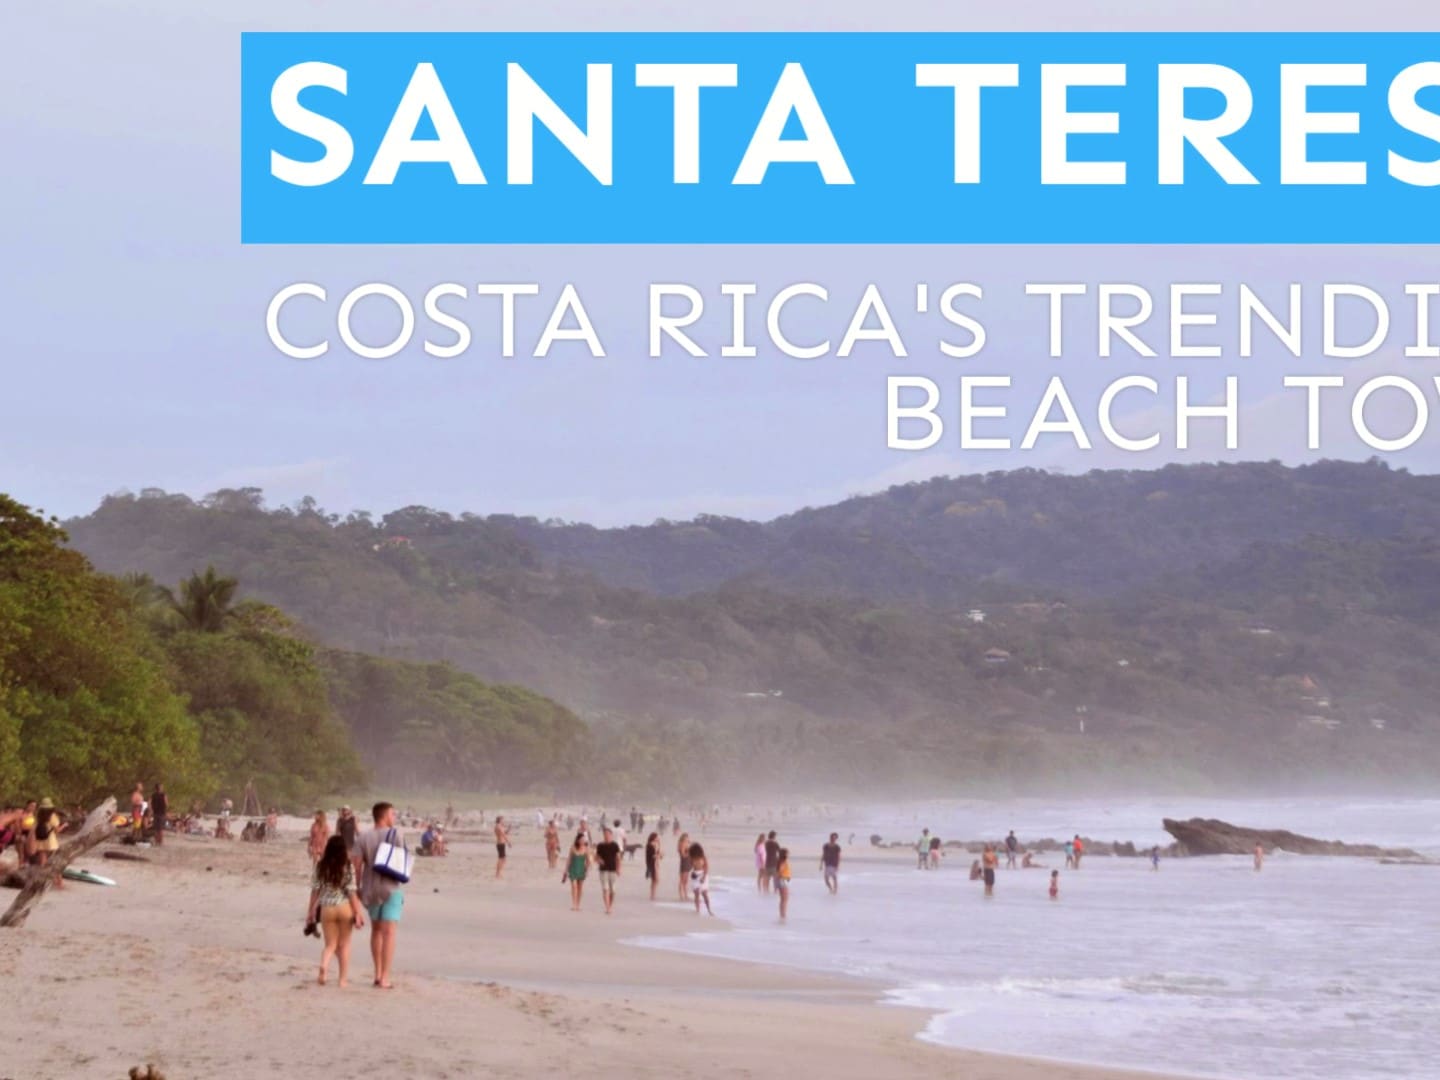 Playa Santa Teresa - All You Need to Know BEFORE You Go (with Photos)